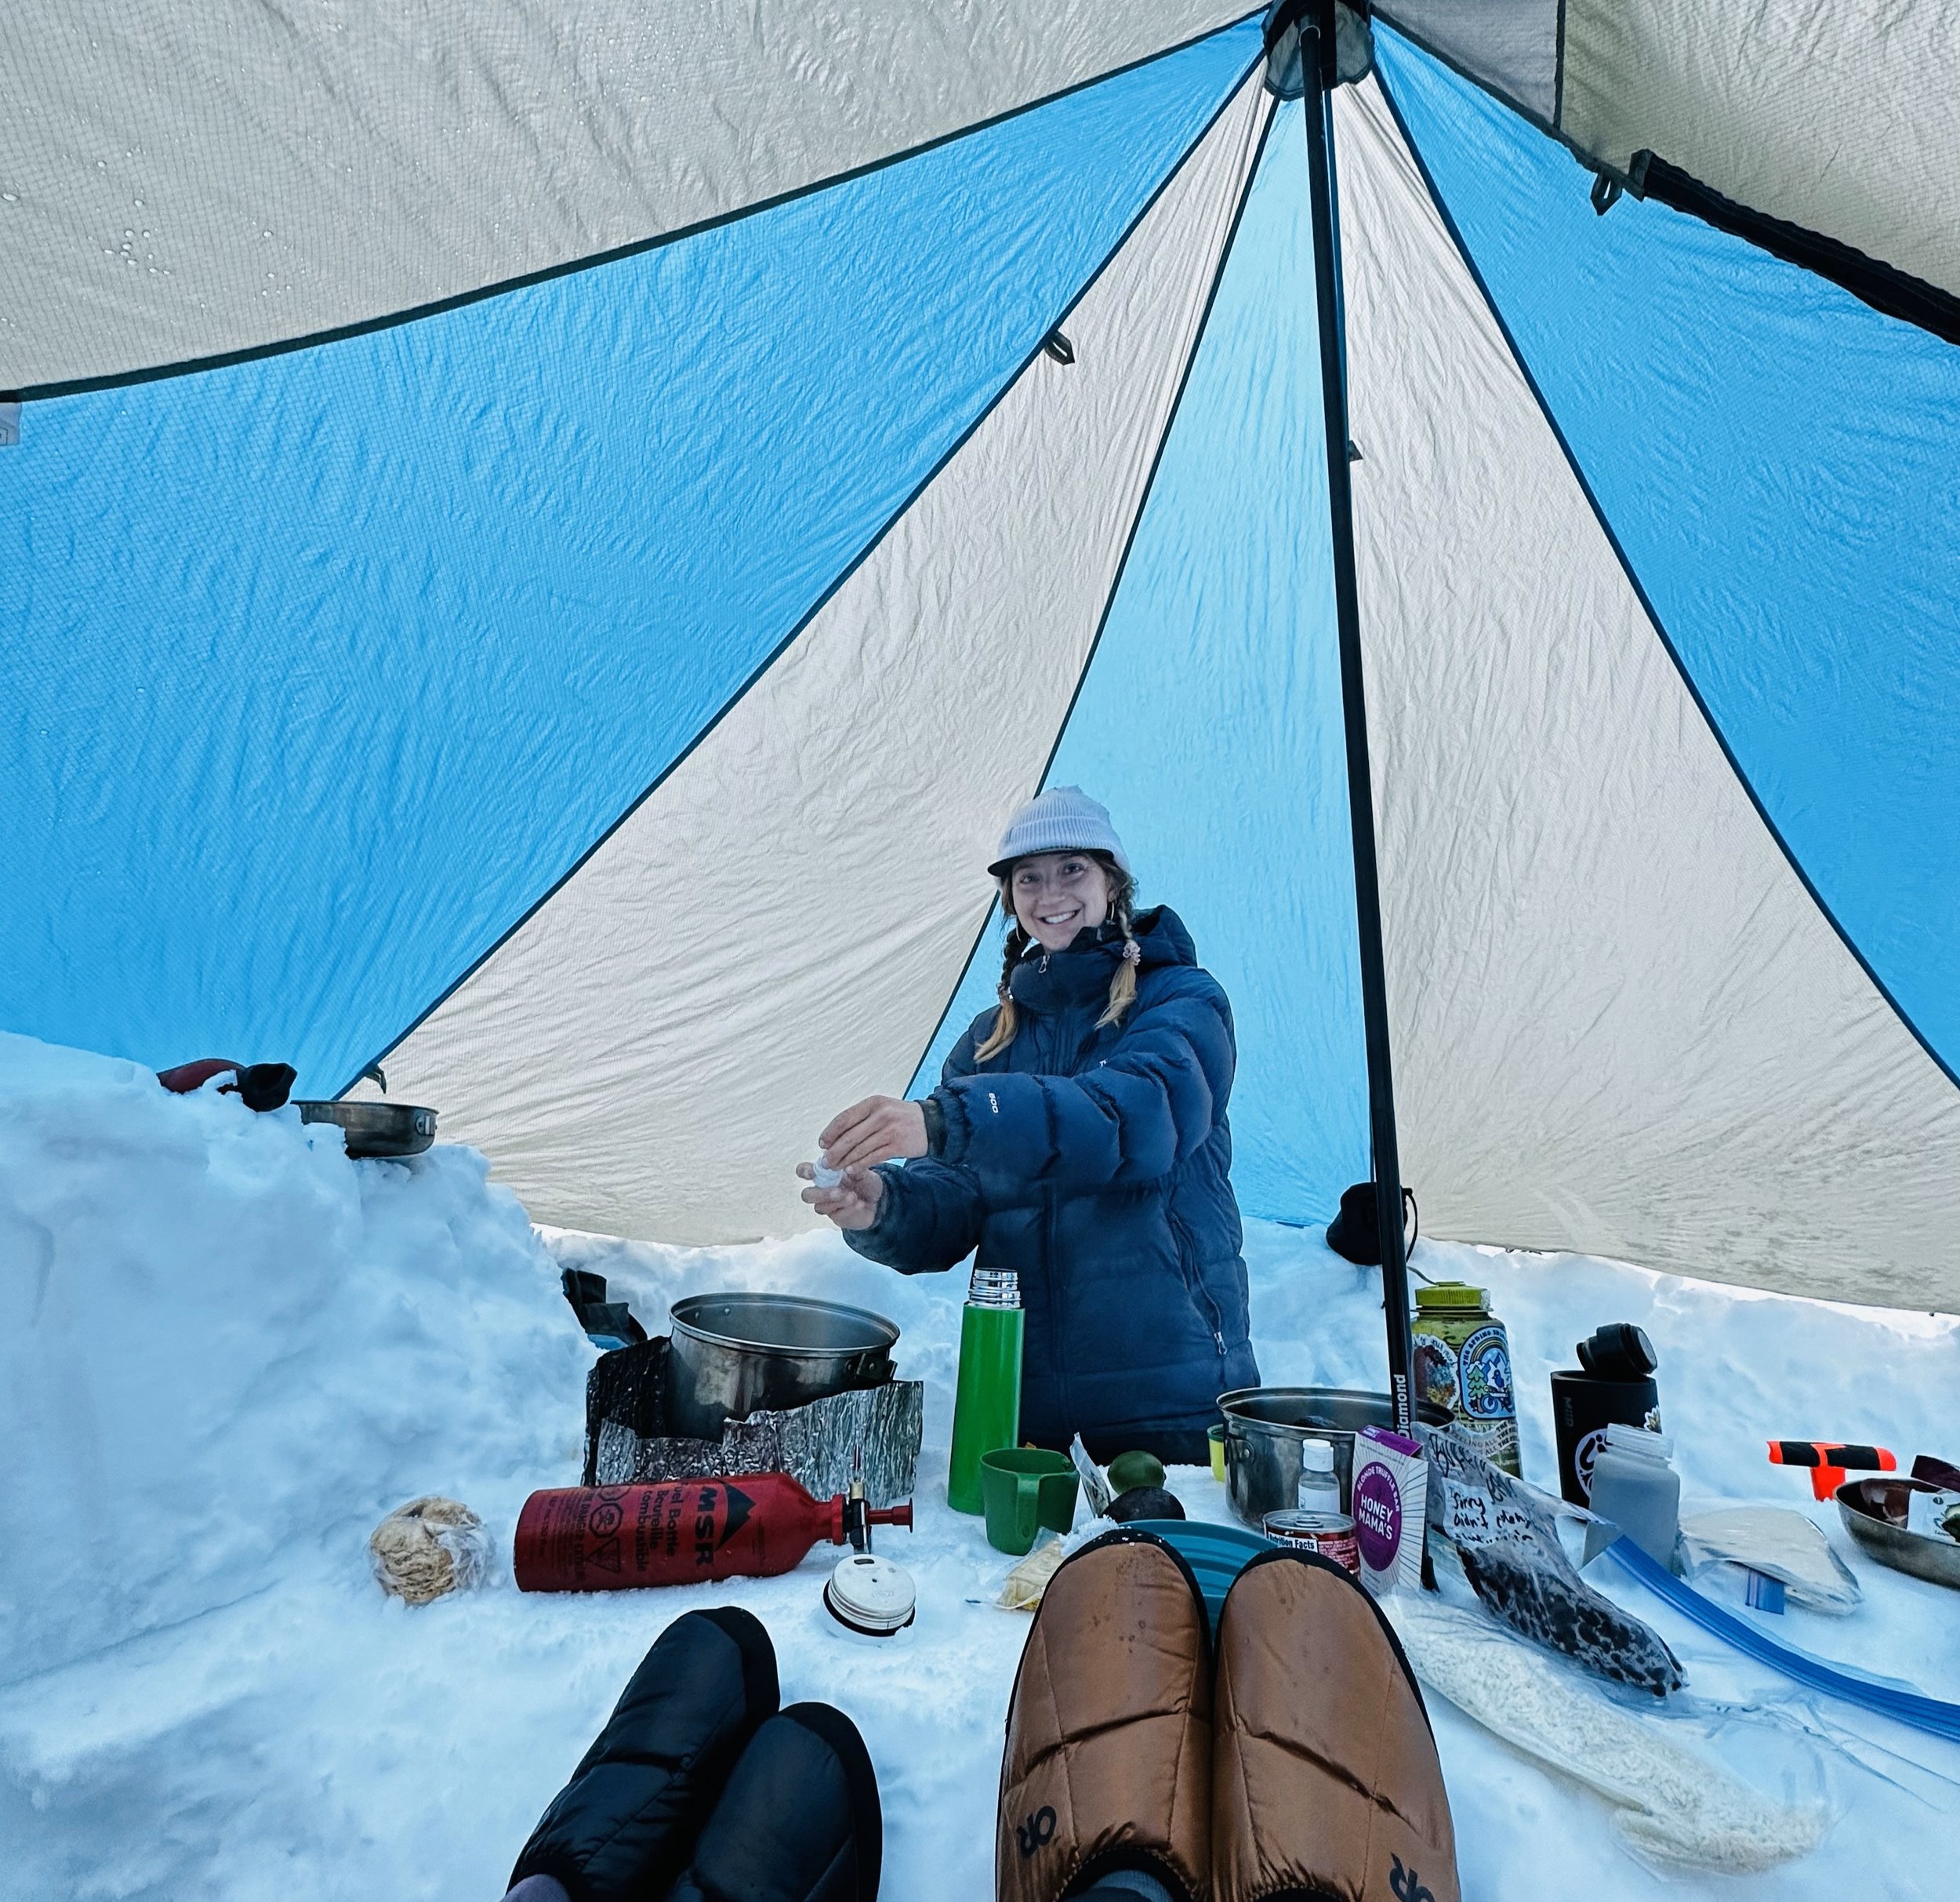 Shasta mountains guide- Tailor prepares a meal in the tent at base camp